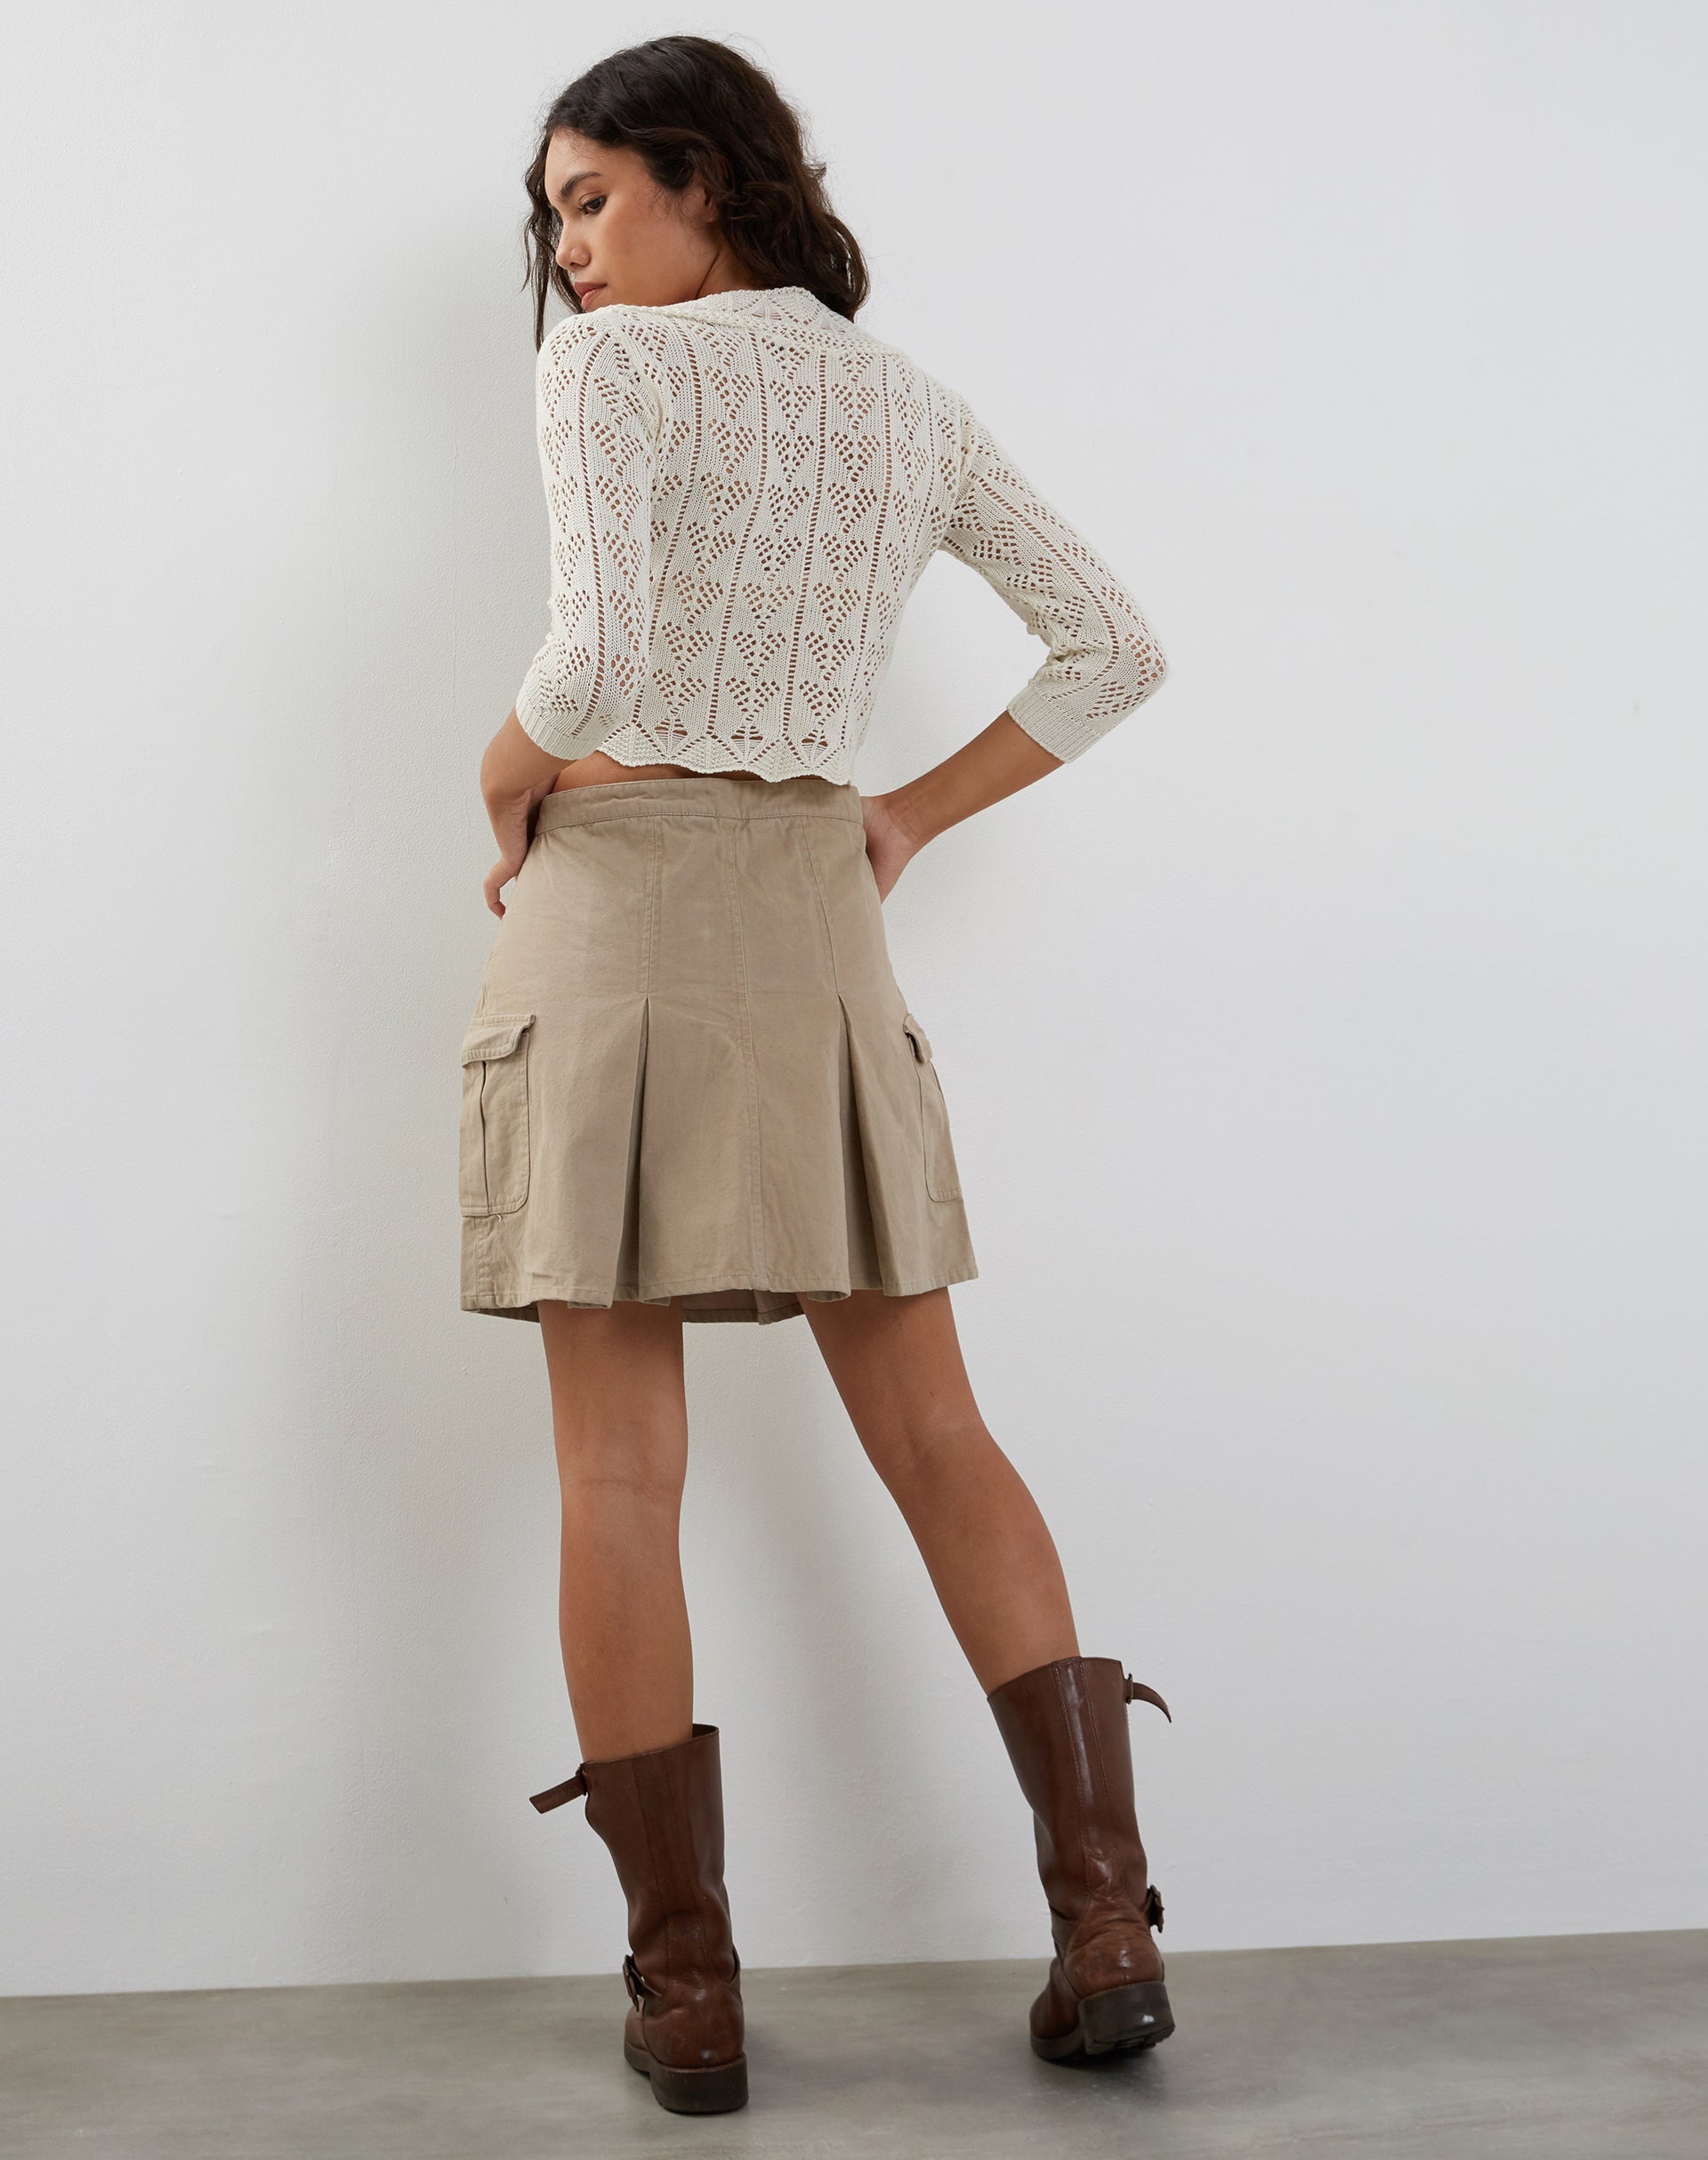 Image of Avery Ribbon Tie Front Cardigan in Ivory